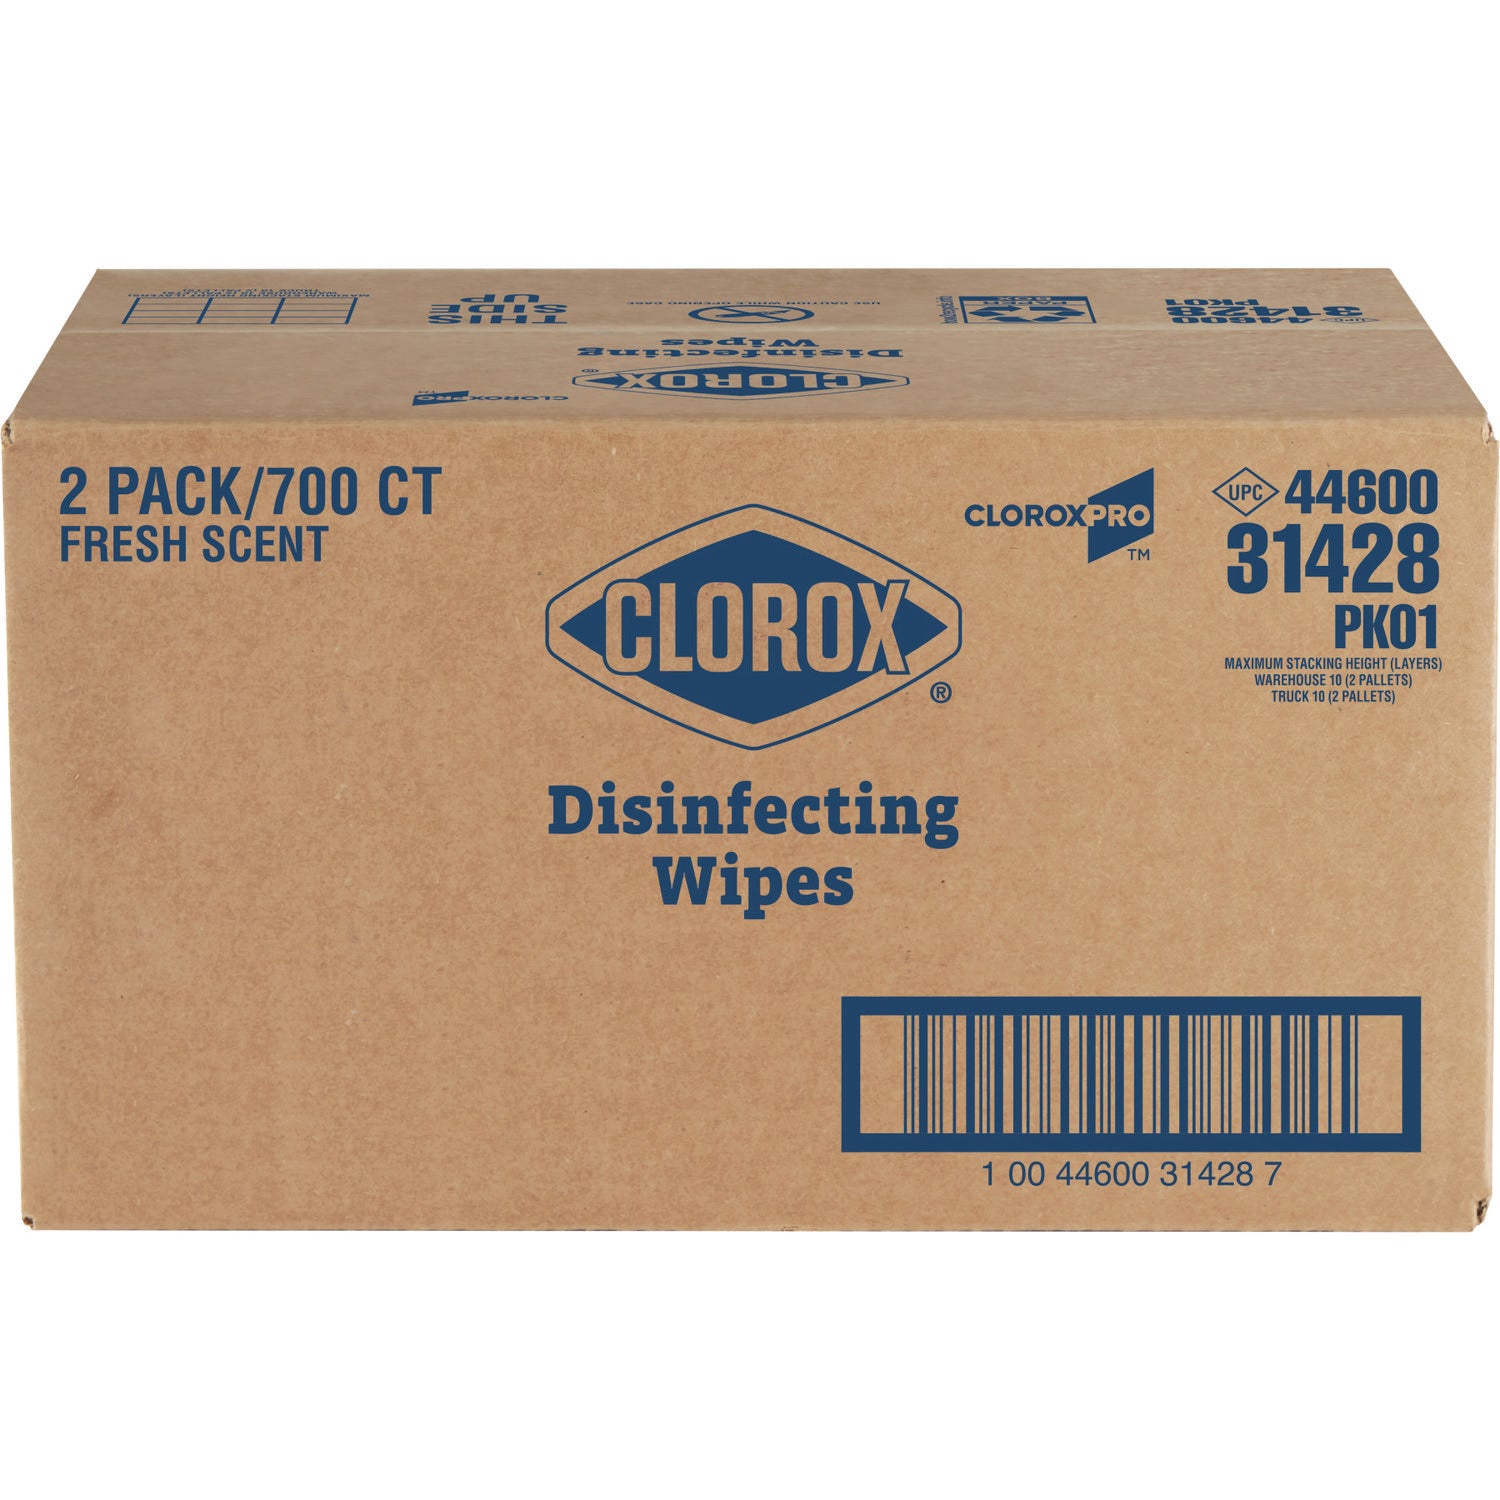 Disinfecting Wipes, 1-Ply, 7 x 8, Fresh Scent, White, 700/Bag Refill, 2 Bags/Carton - 2